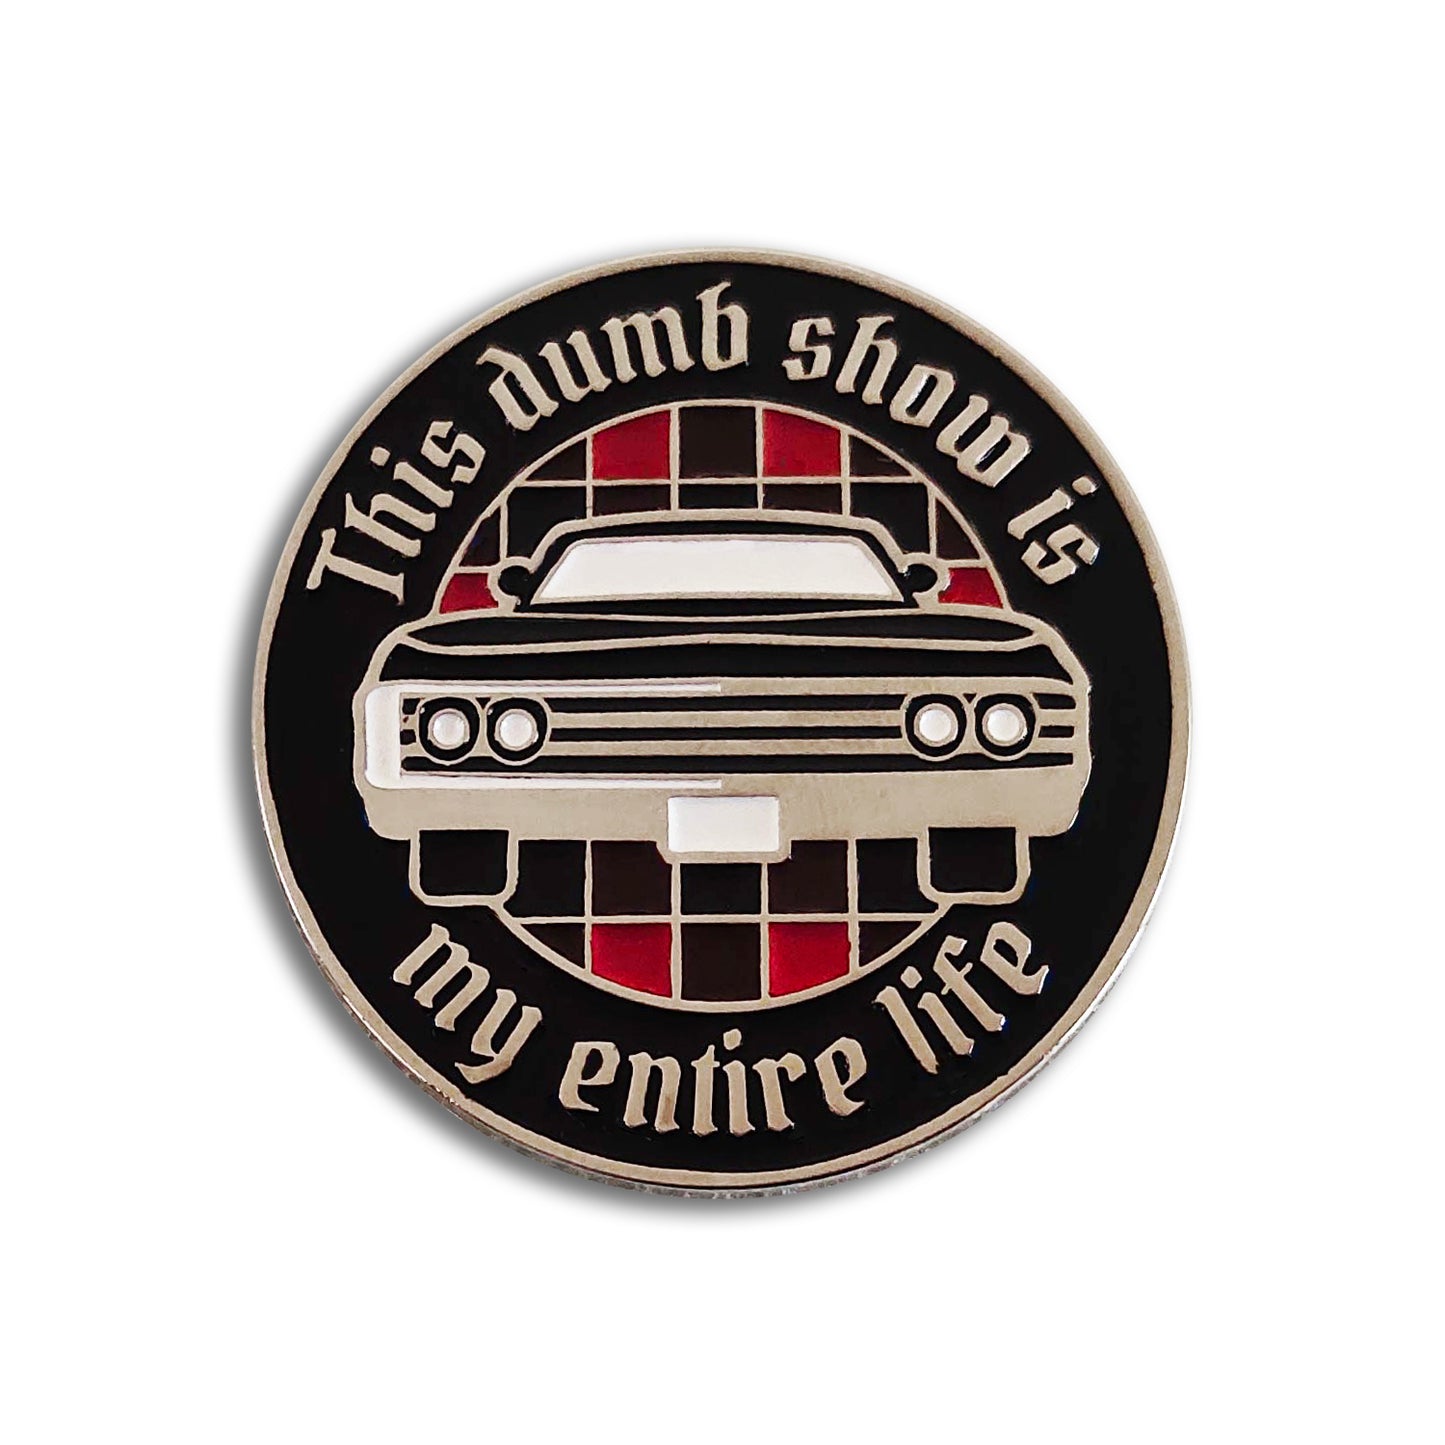 A circular black enamel pin that reads "THIS DUMB SHOW IS MY ENTIRE LIFE" around the edge. The center of the circle has a red-and-black checkered pattern and a vintage black Impala as seen from the front.